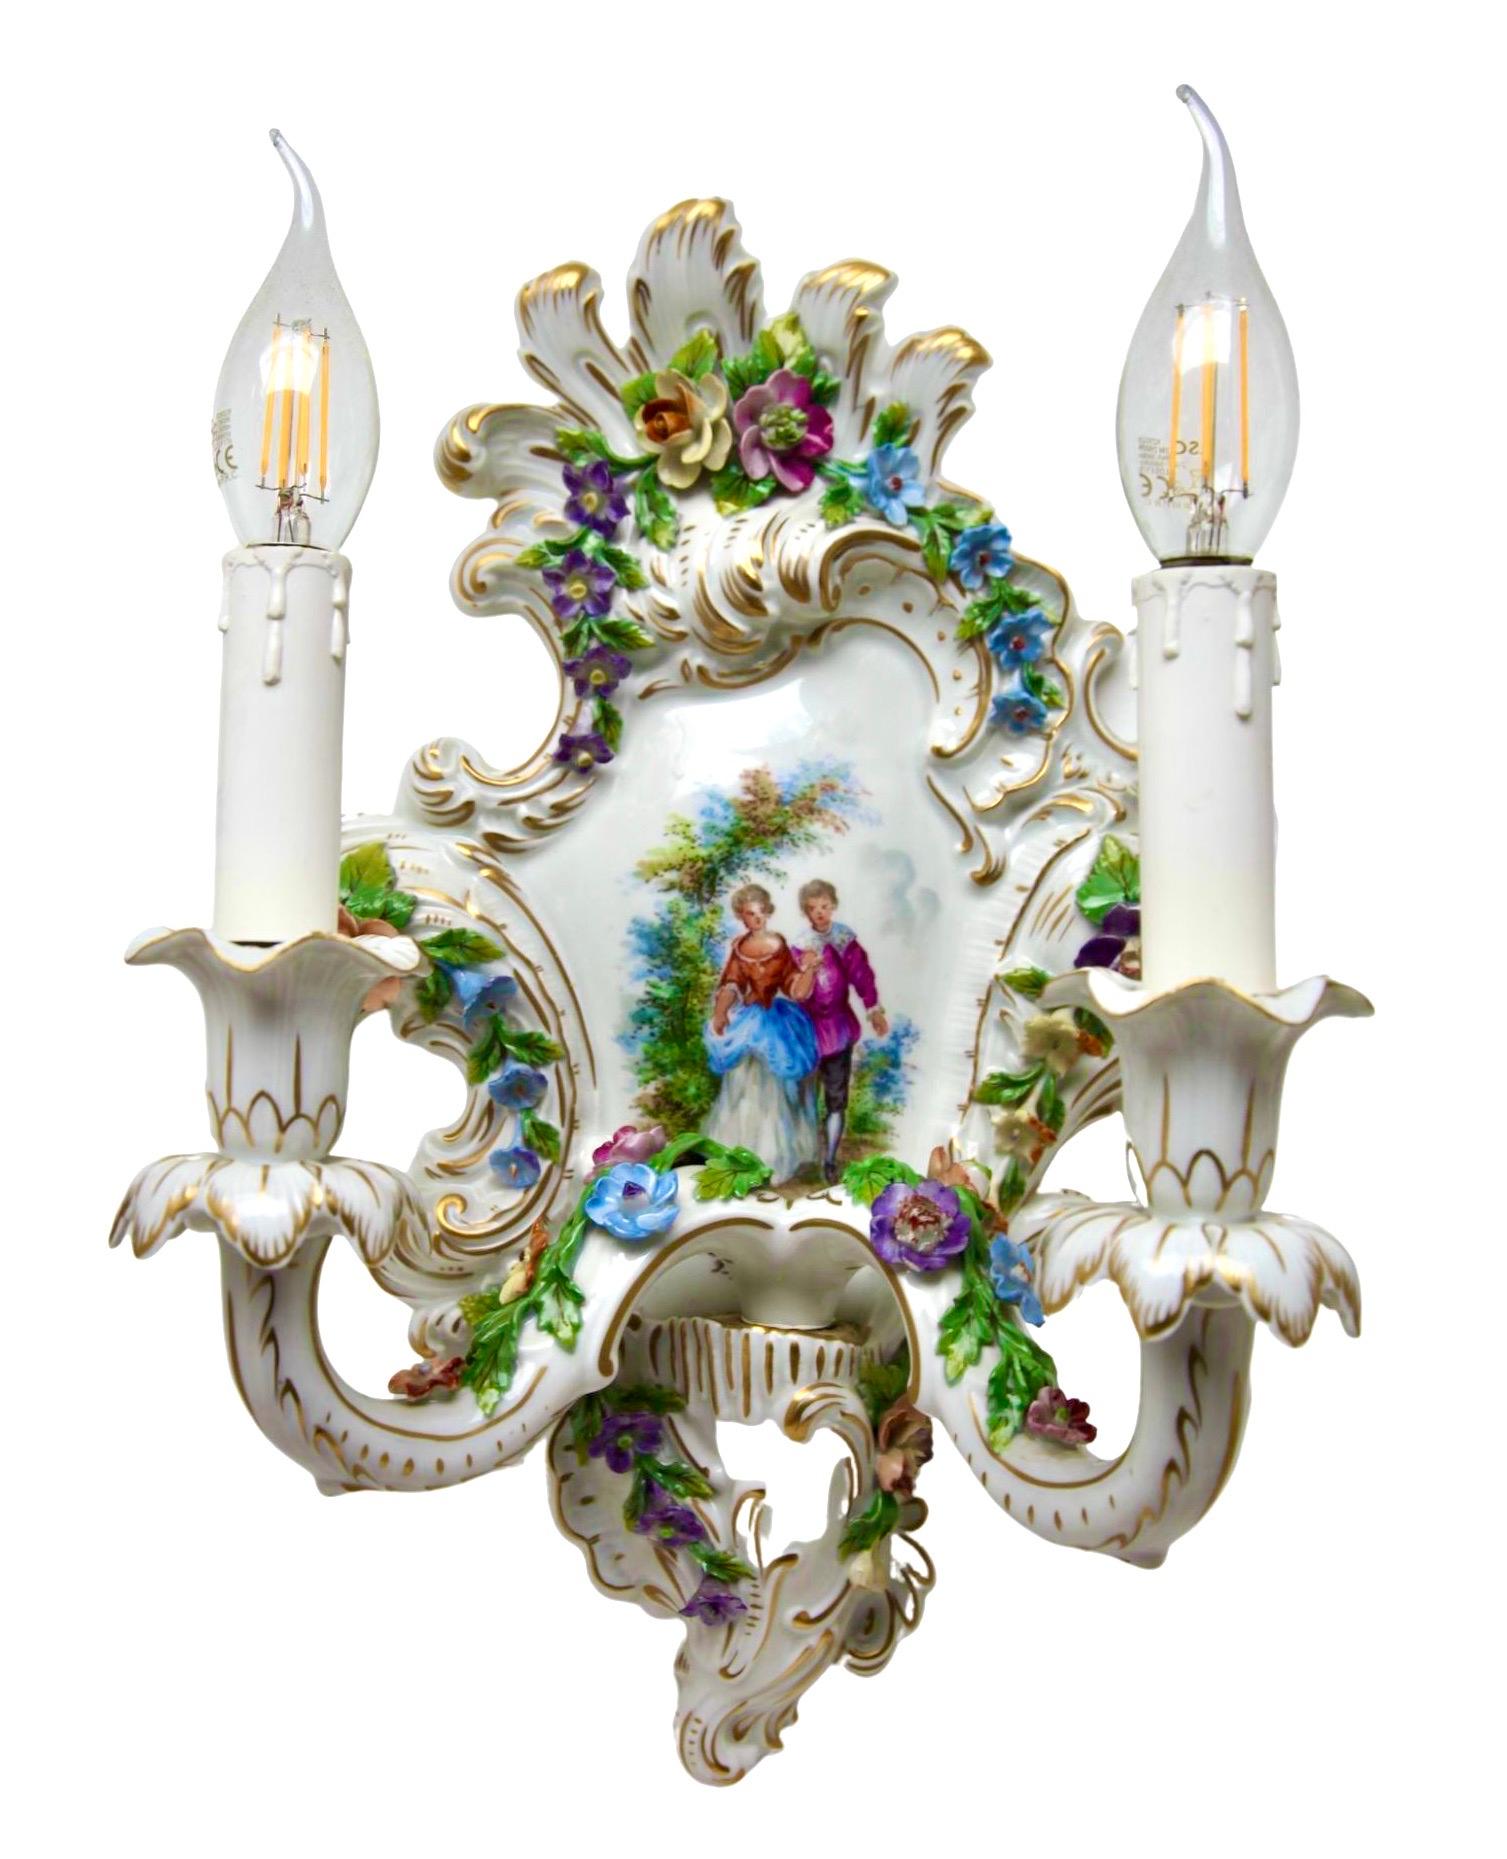 Rococo Revival Porselain Pair Italian Sconces Hand-Crafted and Painted with floral decoration  For Sale